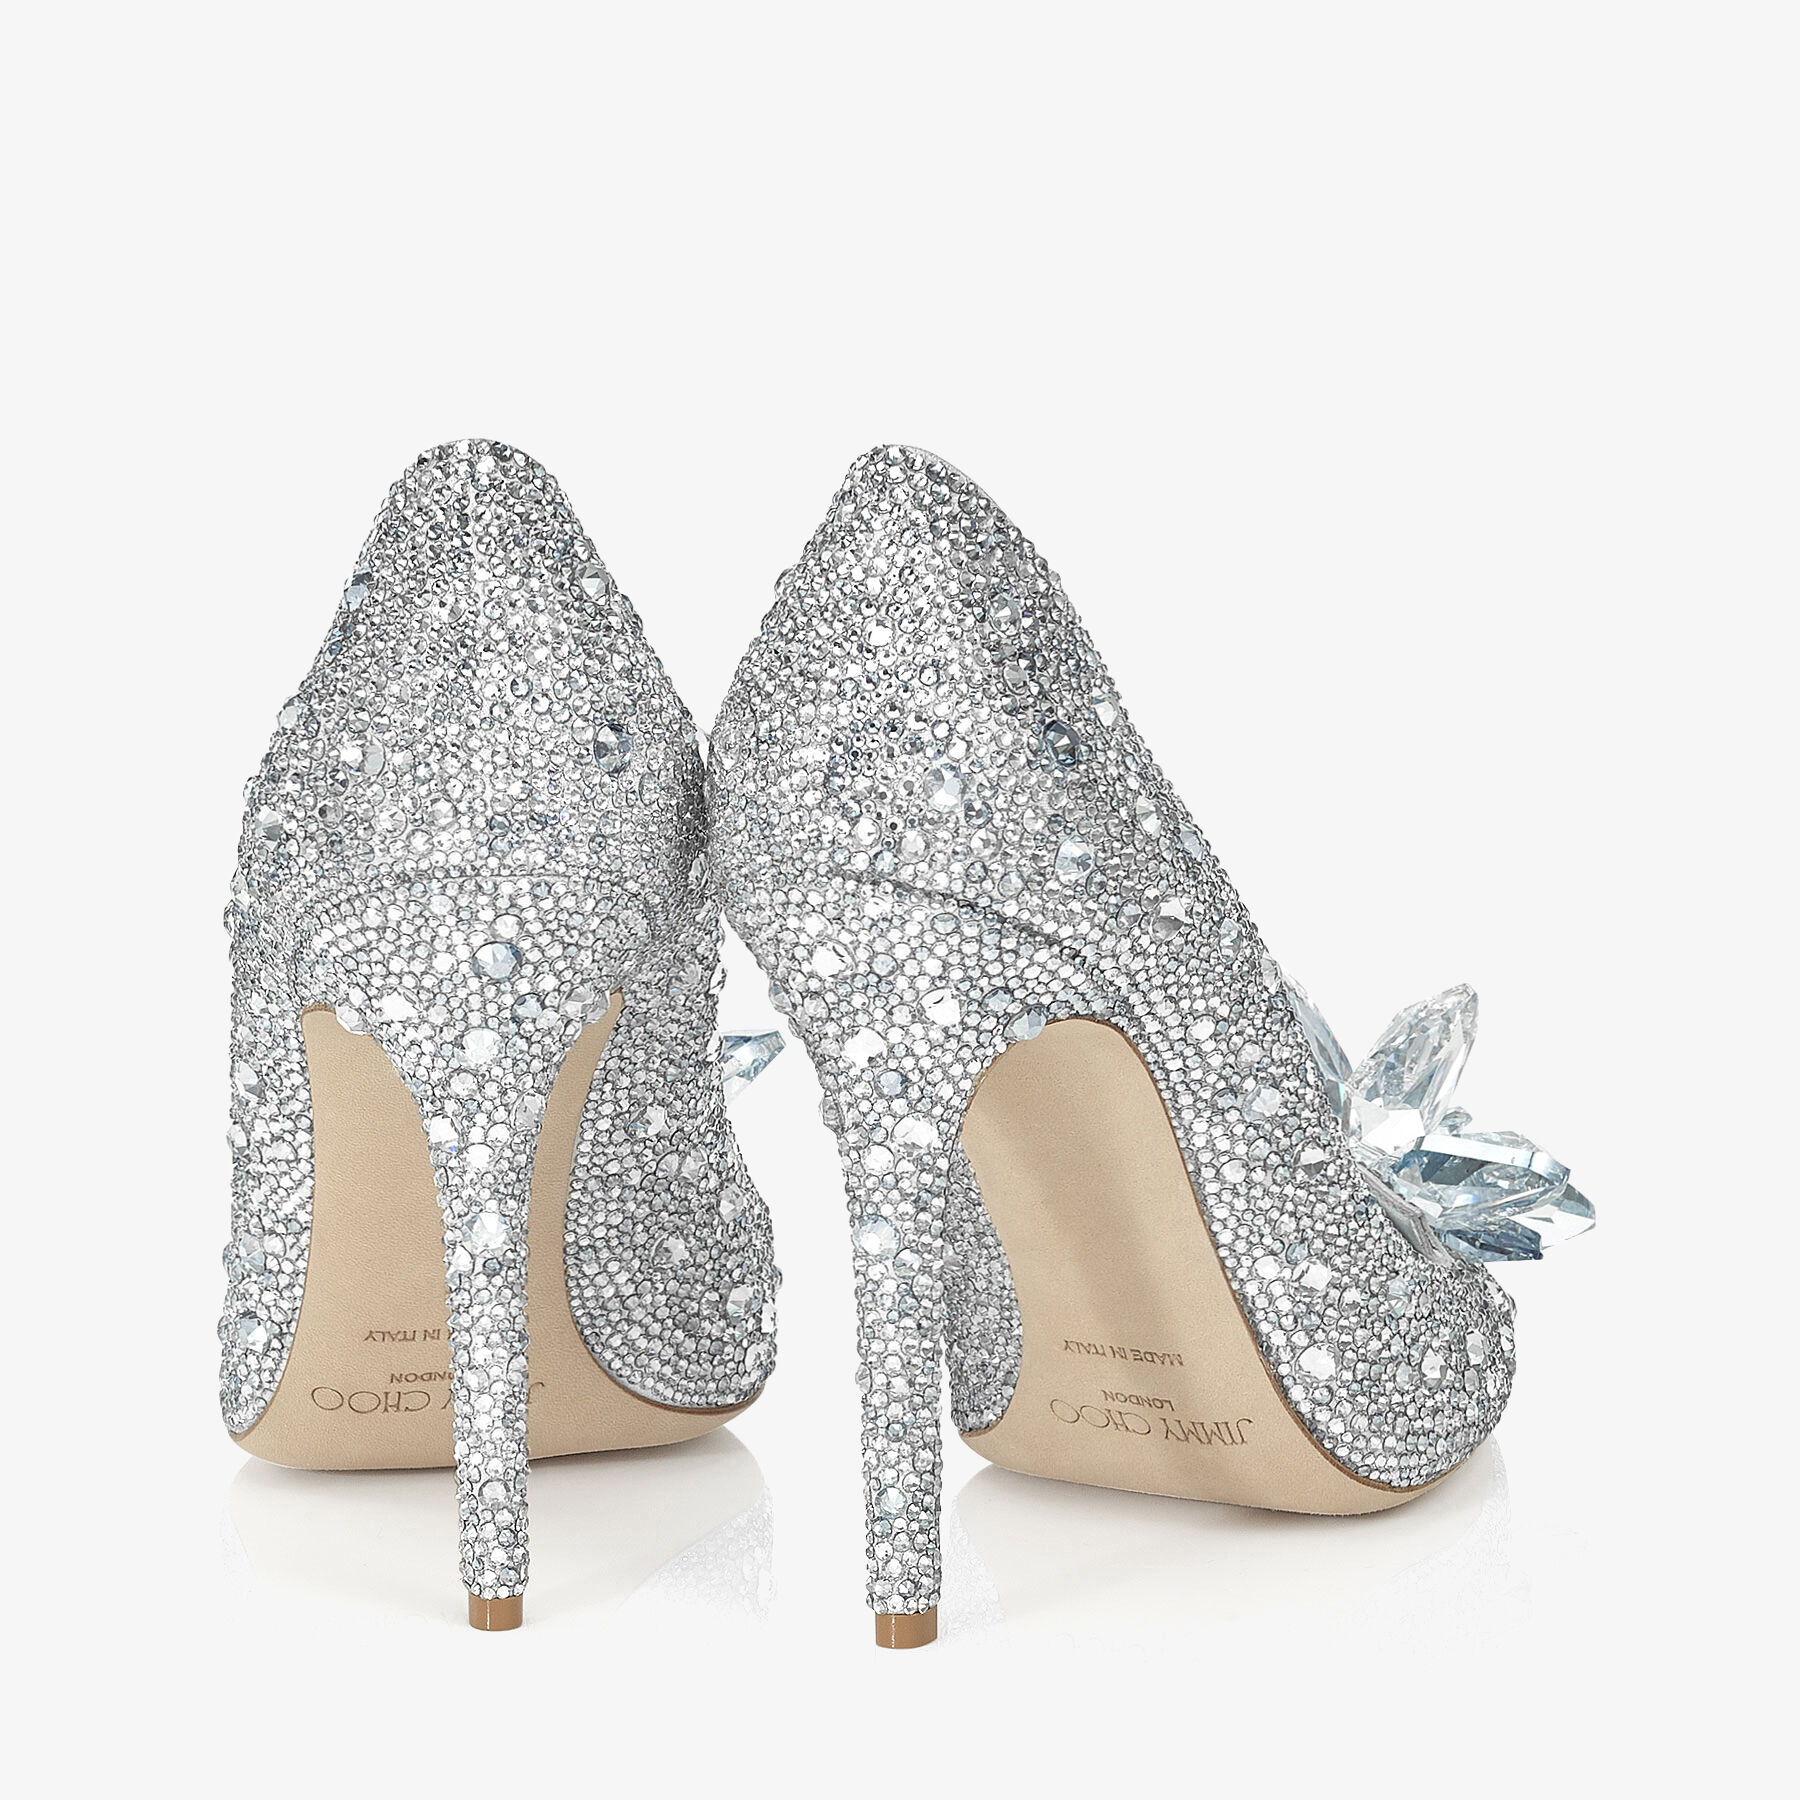 JIMMY CHOO - Glamorous and sophisticated, the AVRIL Cinderella pumps  capture the true essence of Jimmy Choo in all their crystal-covered  perfection. Discover the Cinderella collection at